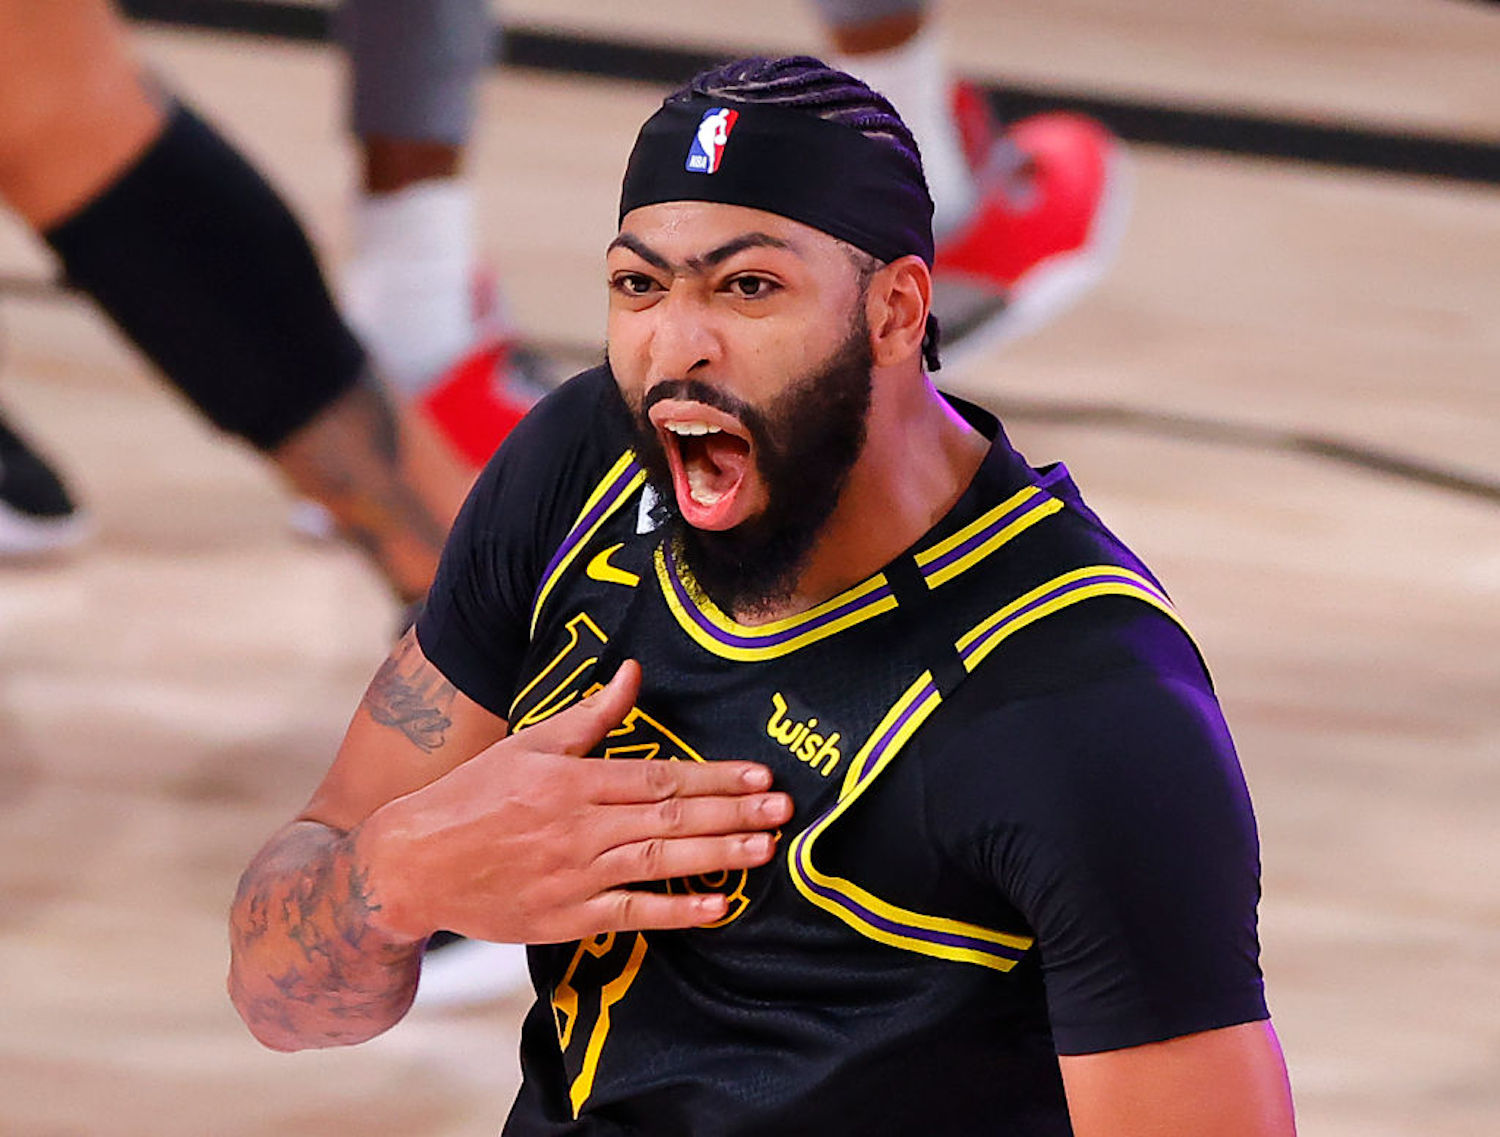 Anthony Davis saved the Lakers with a buzzer-beating 3-pointer in Game 2 of the WCF, and the first thing he did after was honor Kobe Bryant.